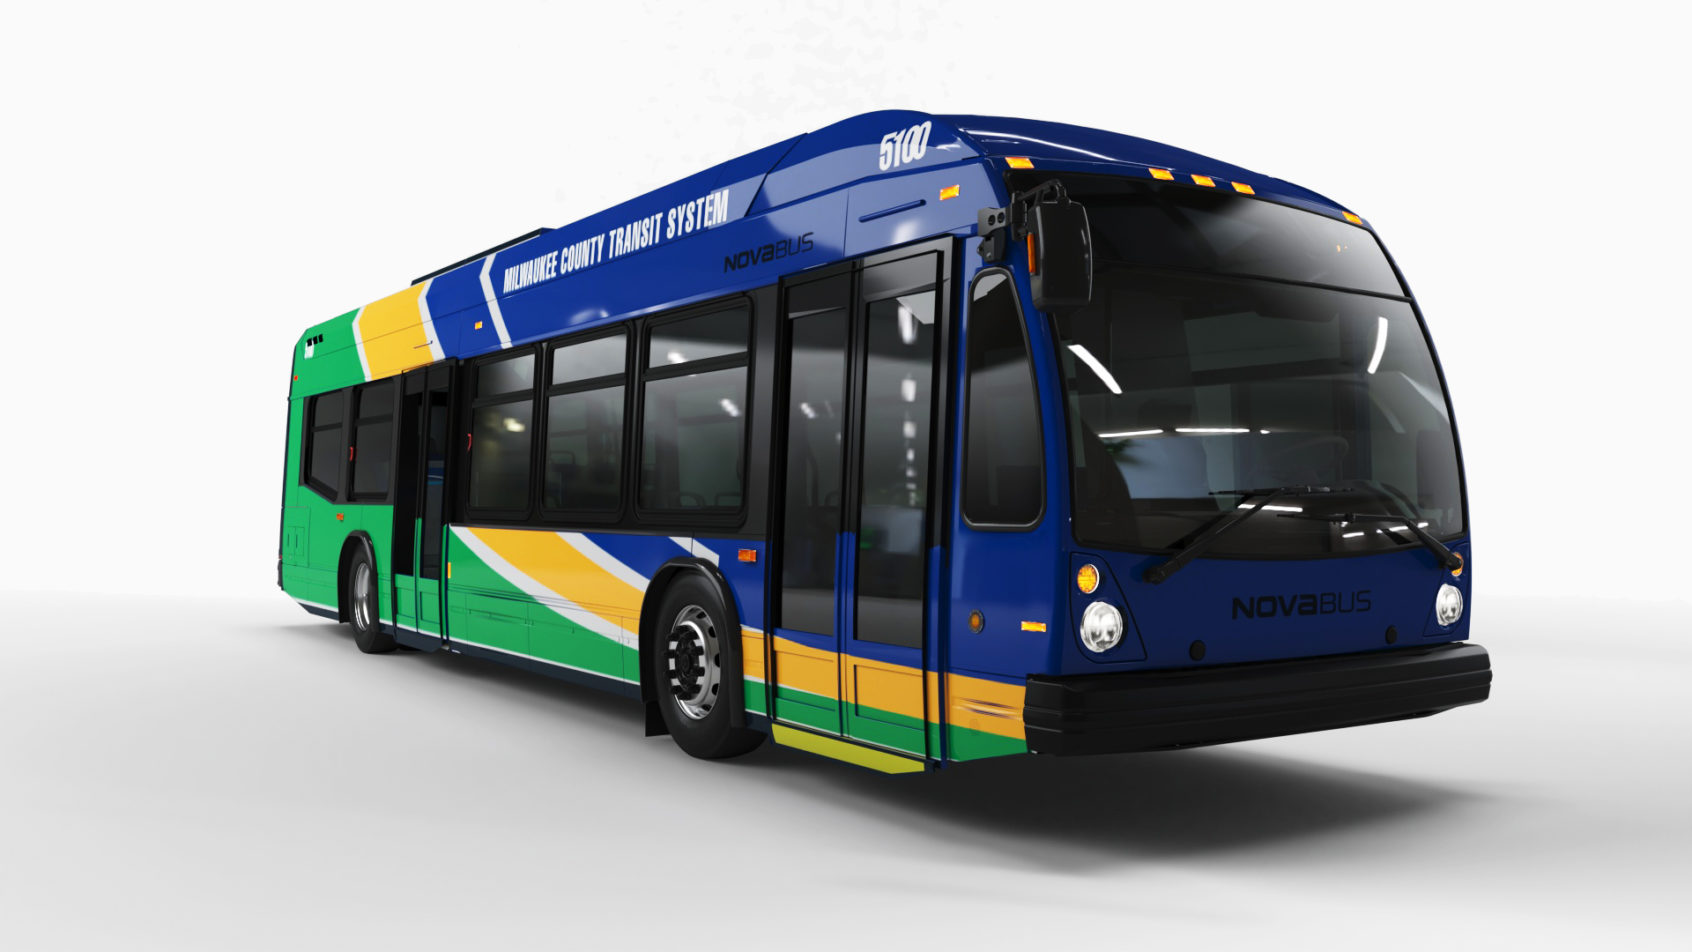 Milwaukee County Transit System selects Nova Bus to supply 15 electric LFSe+ buses — a first LFSe+ order for Nova Bus in the U.S.